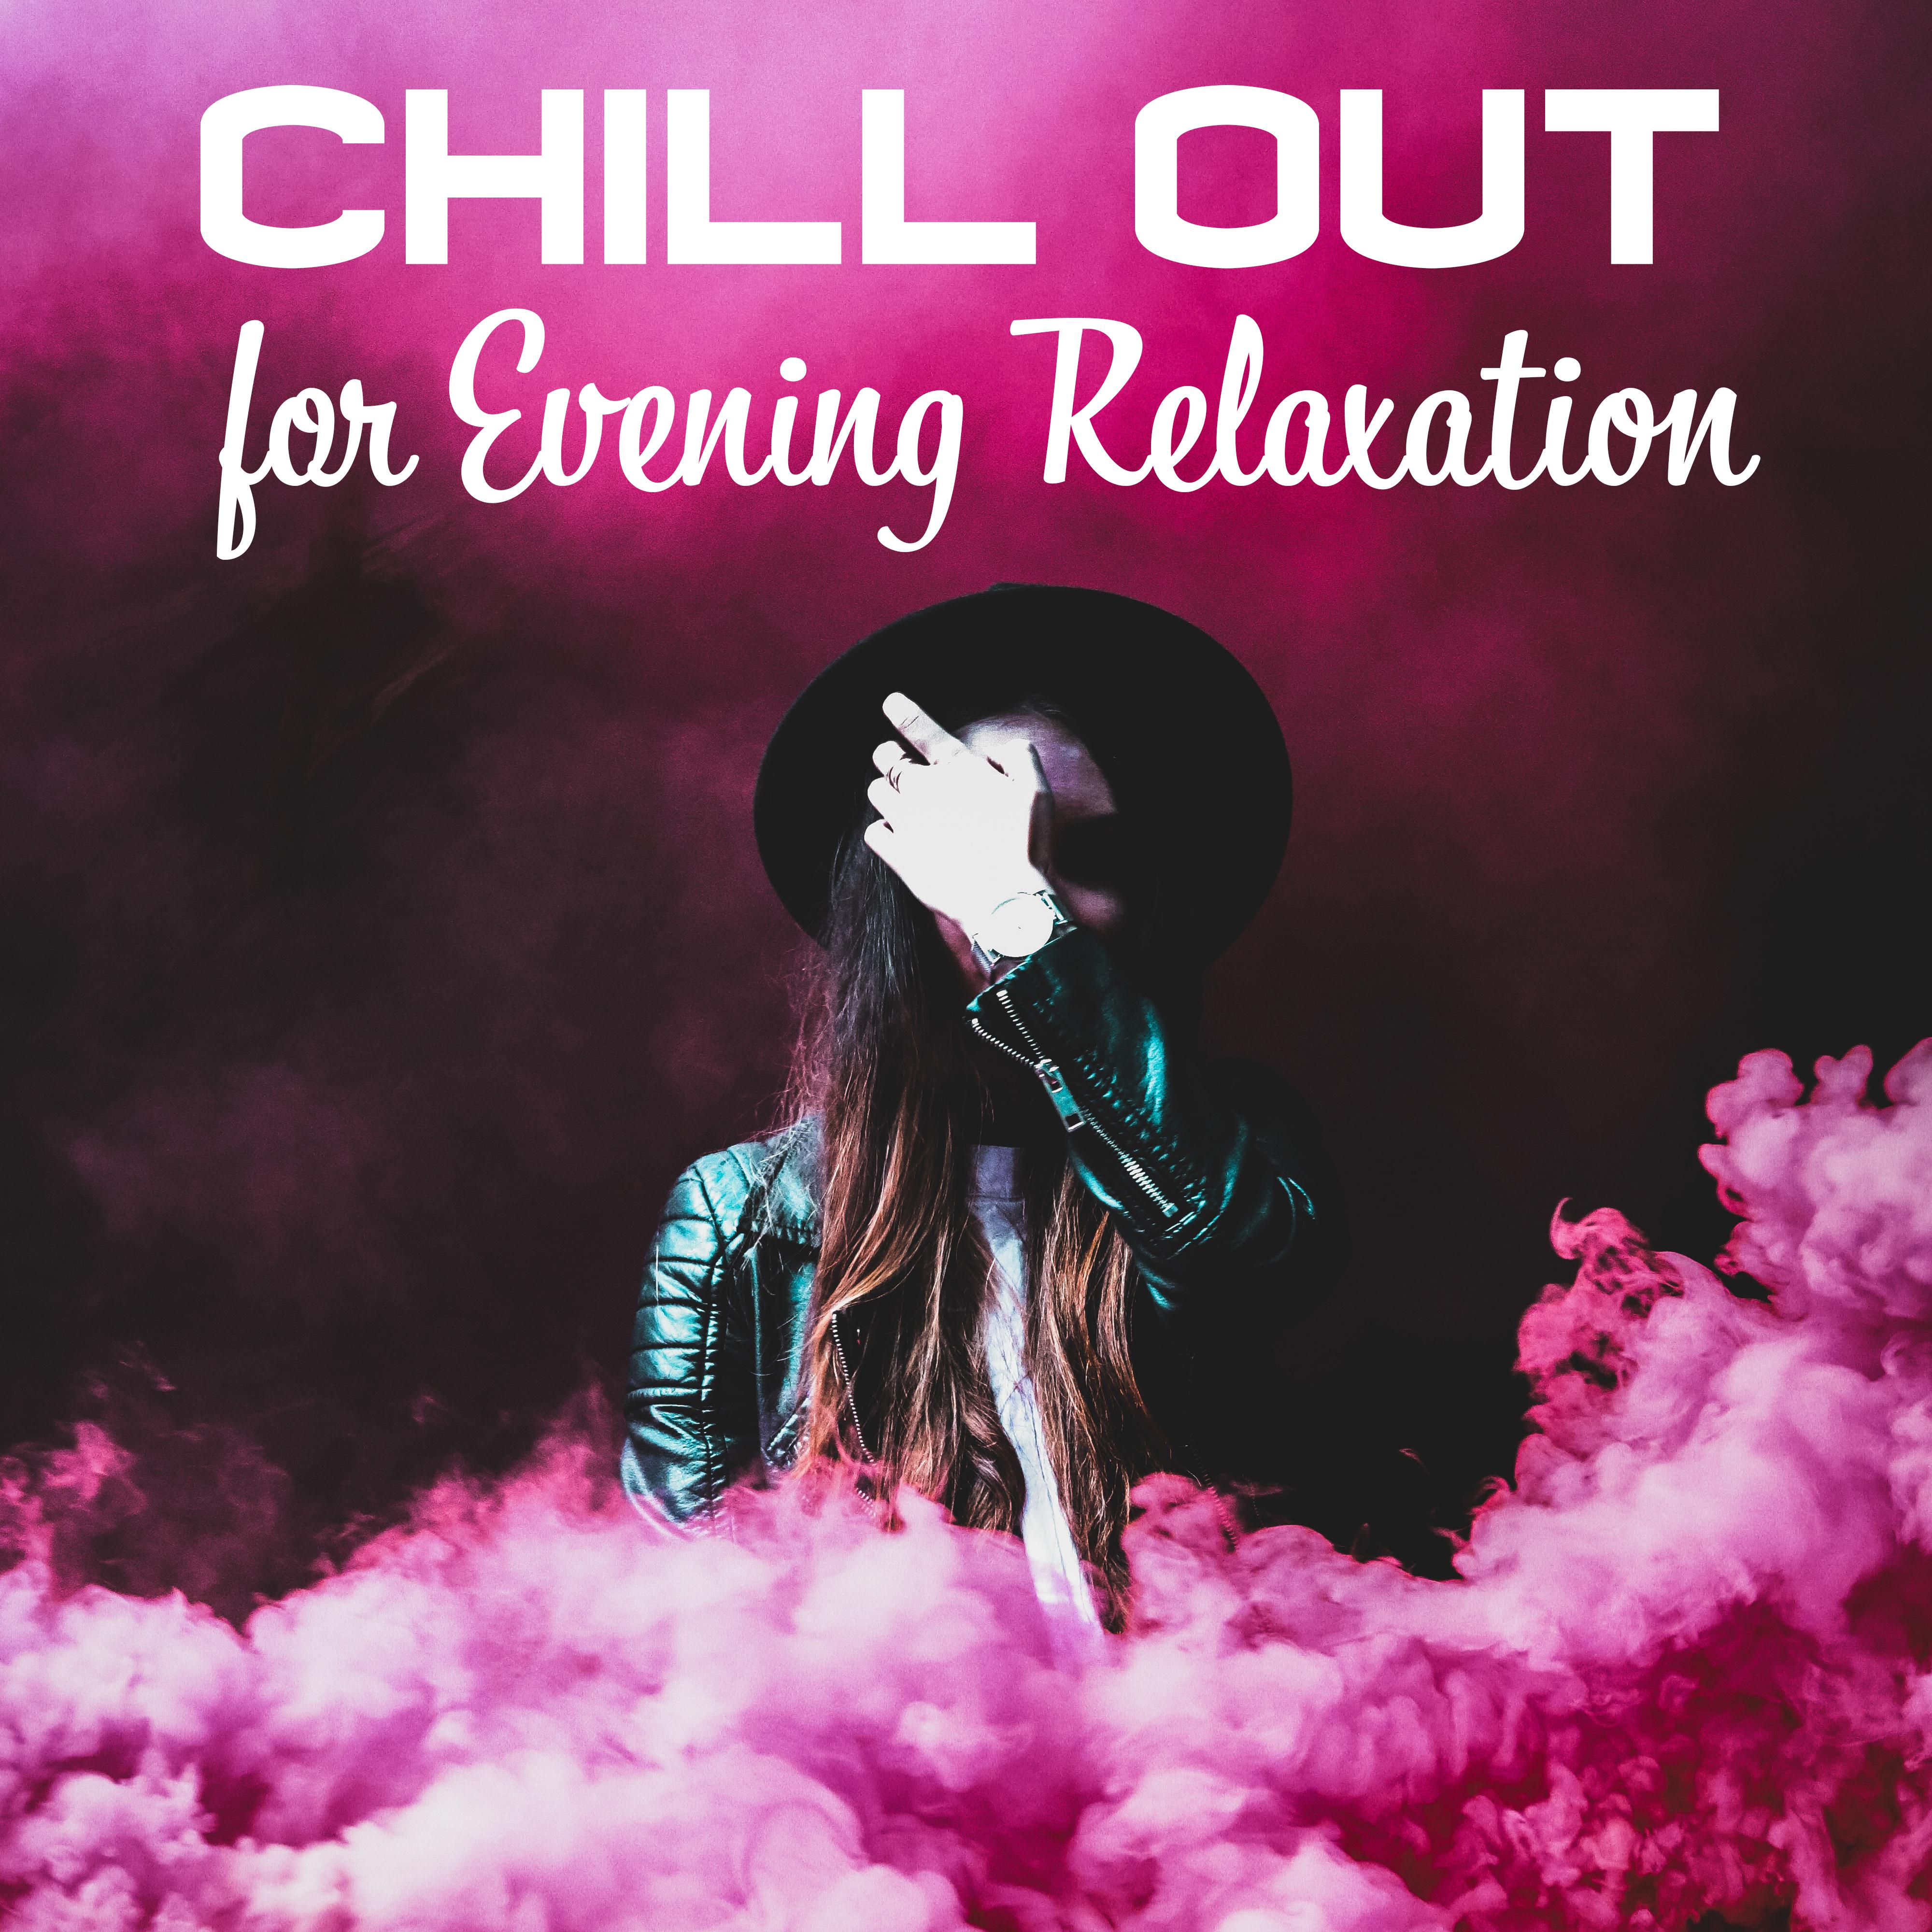 Chill Out for Evening Relaxation